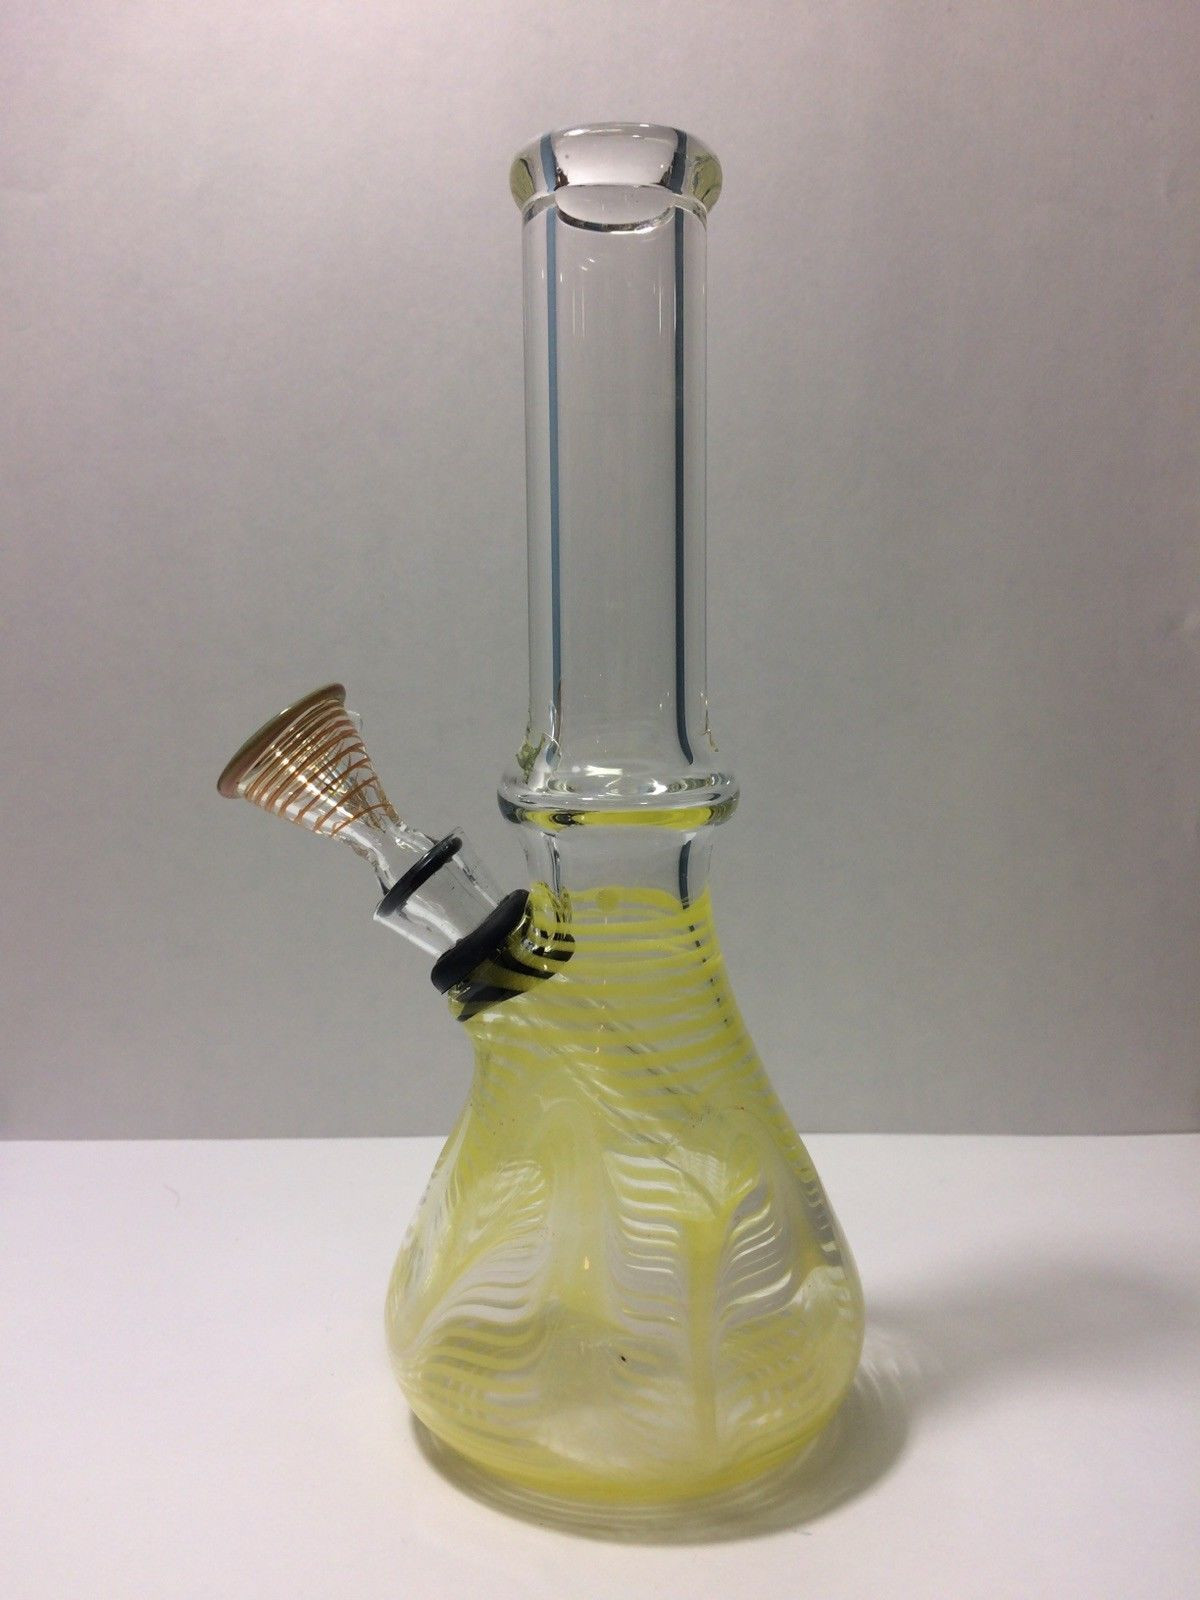 23 Lovely Tall Thick Glass Vase 2024 free download tall thick glass vase of us 25 00 7 inch tall beaker bong made in usa fast discreet within us 25 00 7 inch tall beaker bong made in usa fast discreet shipping leave a message note with your 